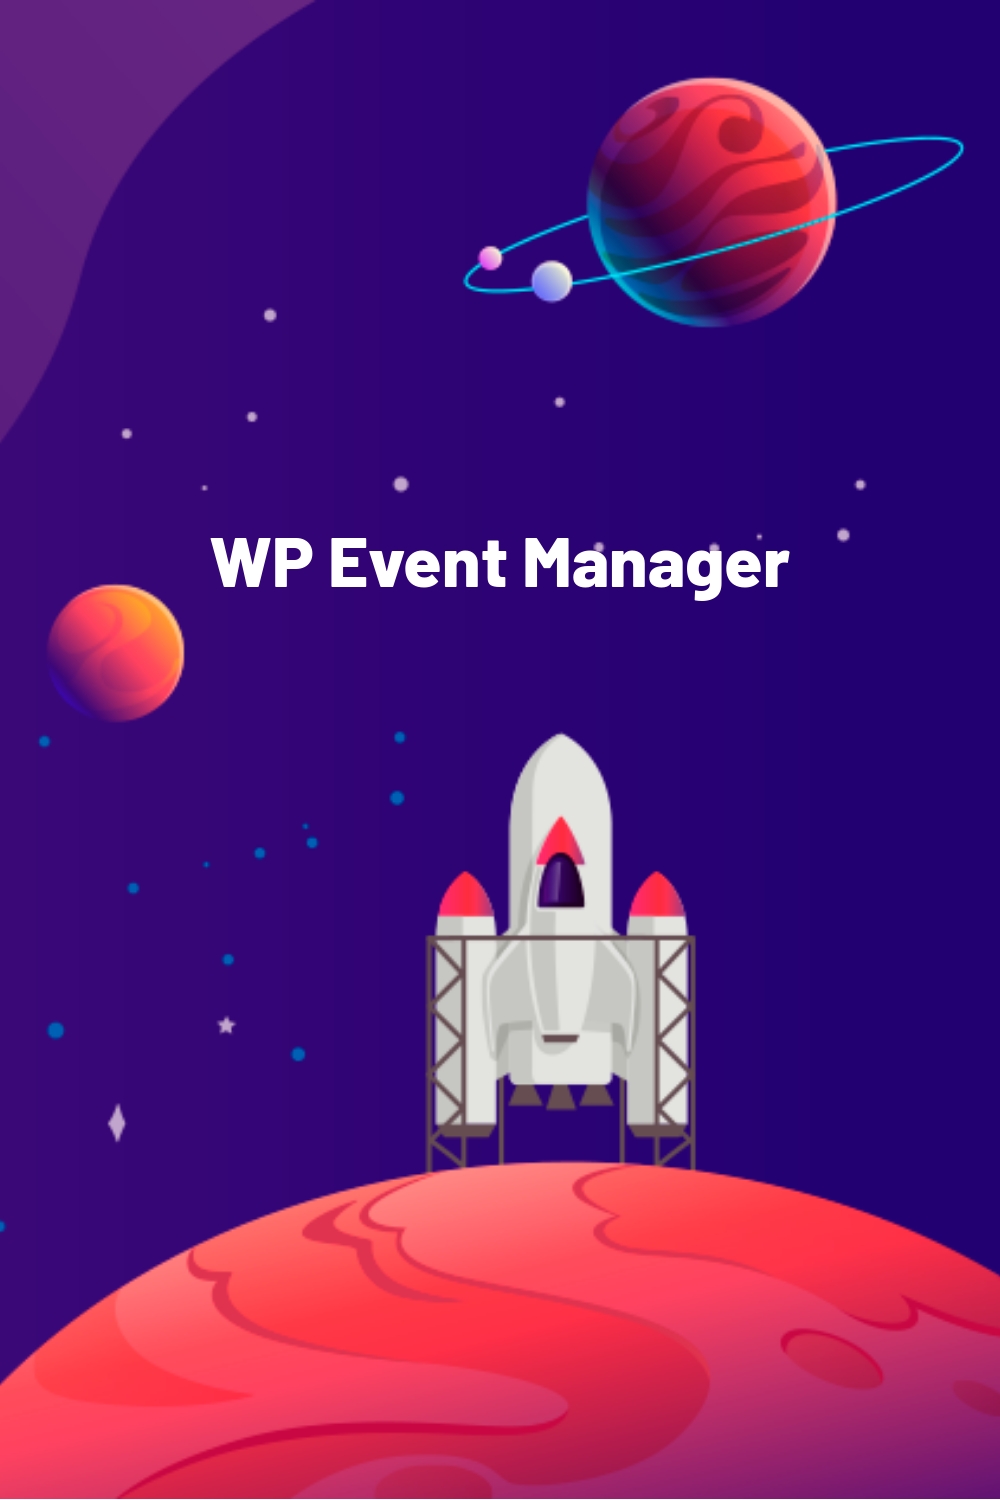 WP Event Manager